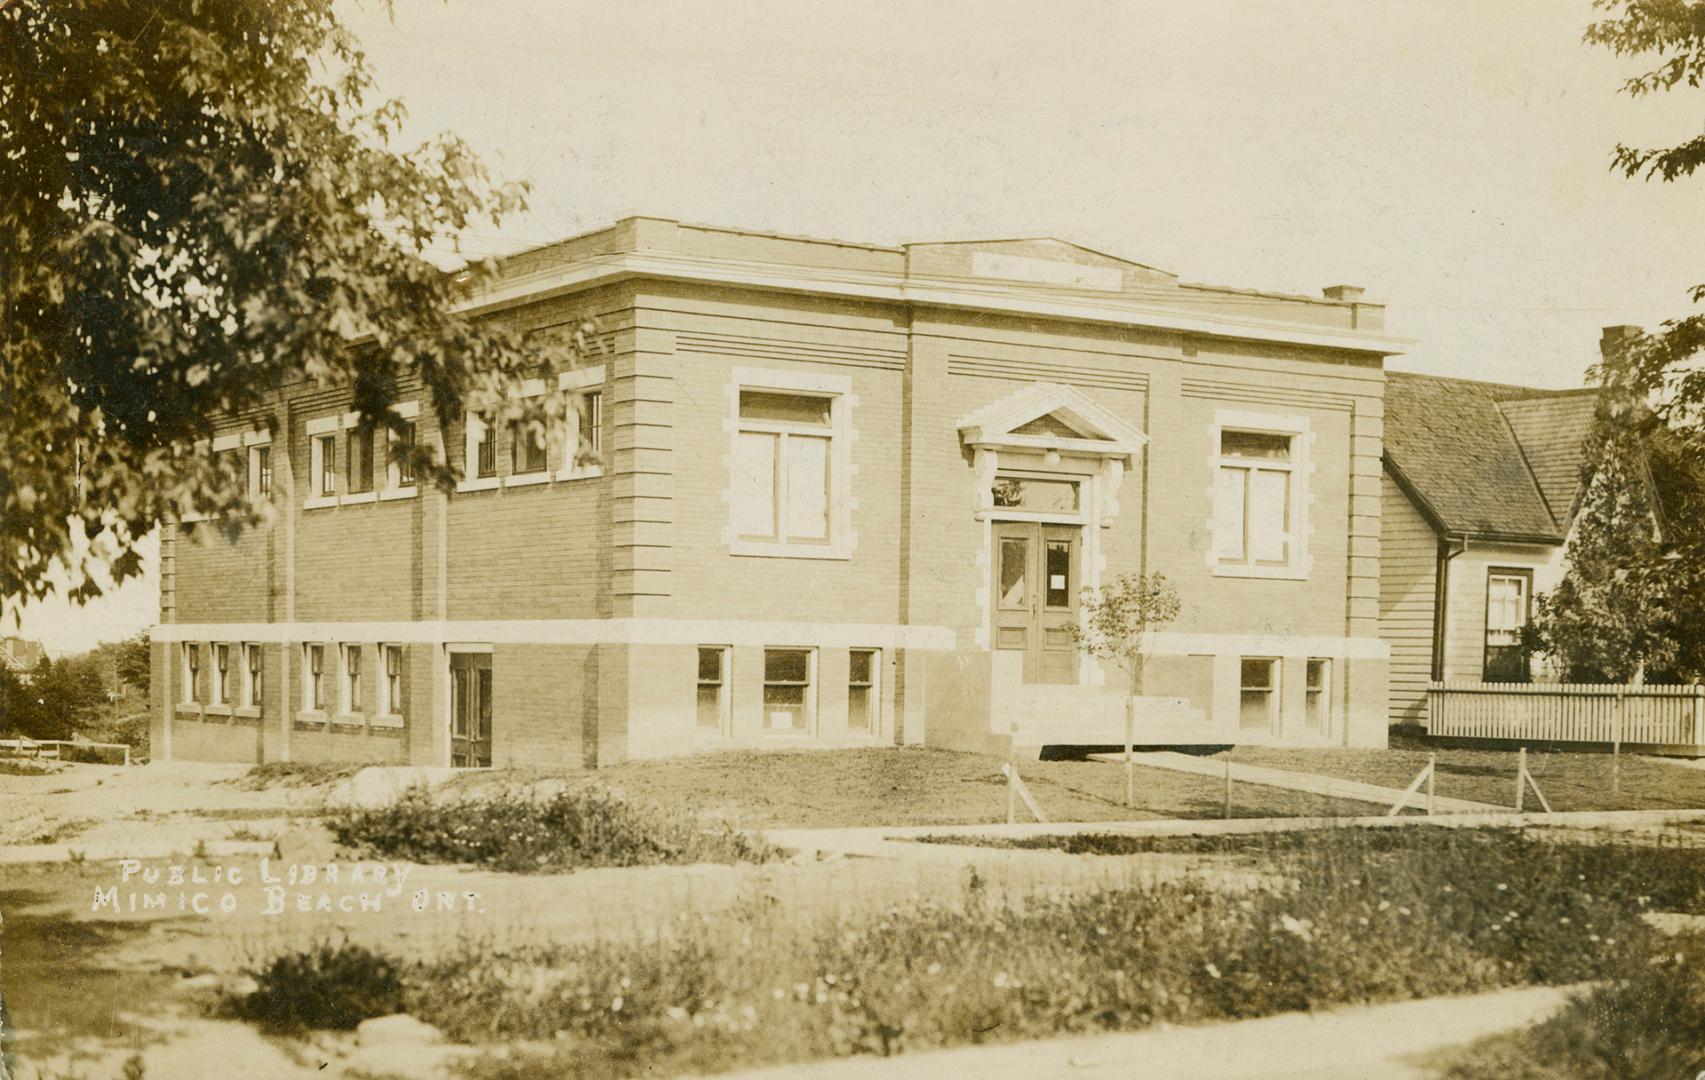 Black and white photograph of a typical small town Carnegie library.